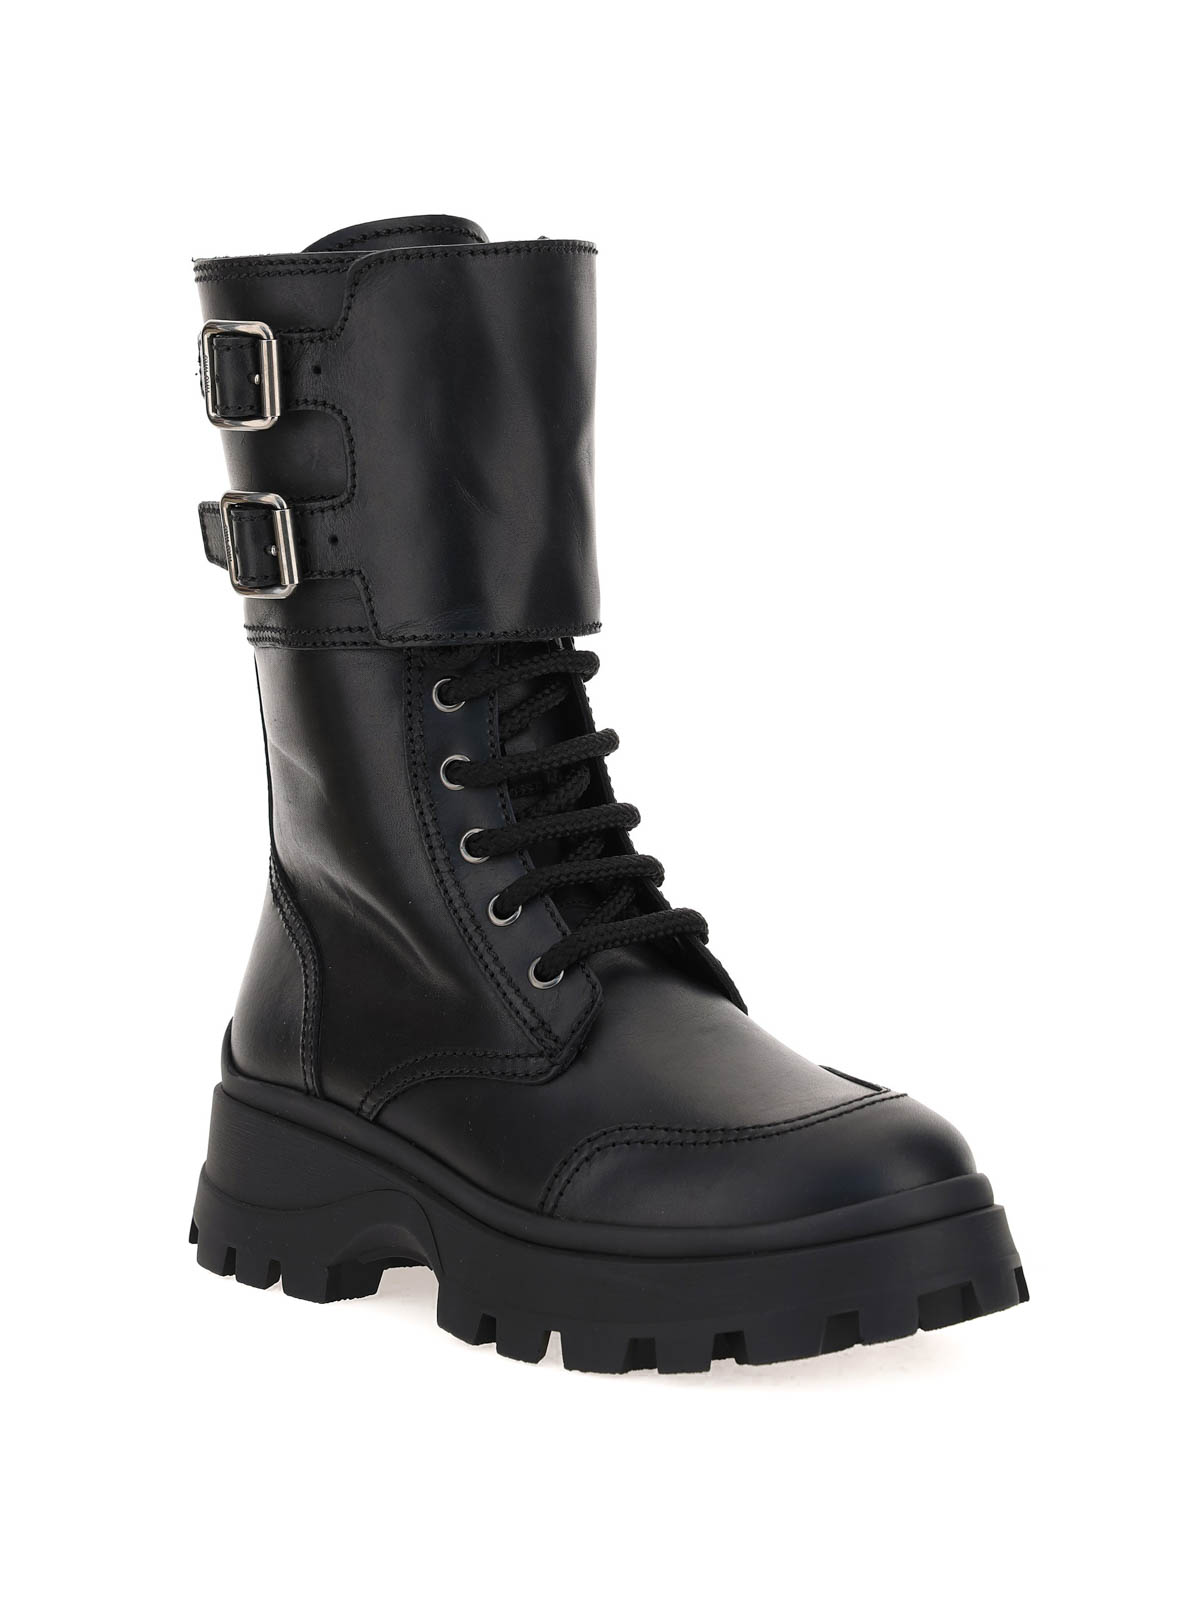 leather boots calf length